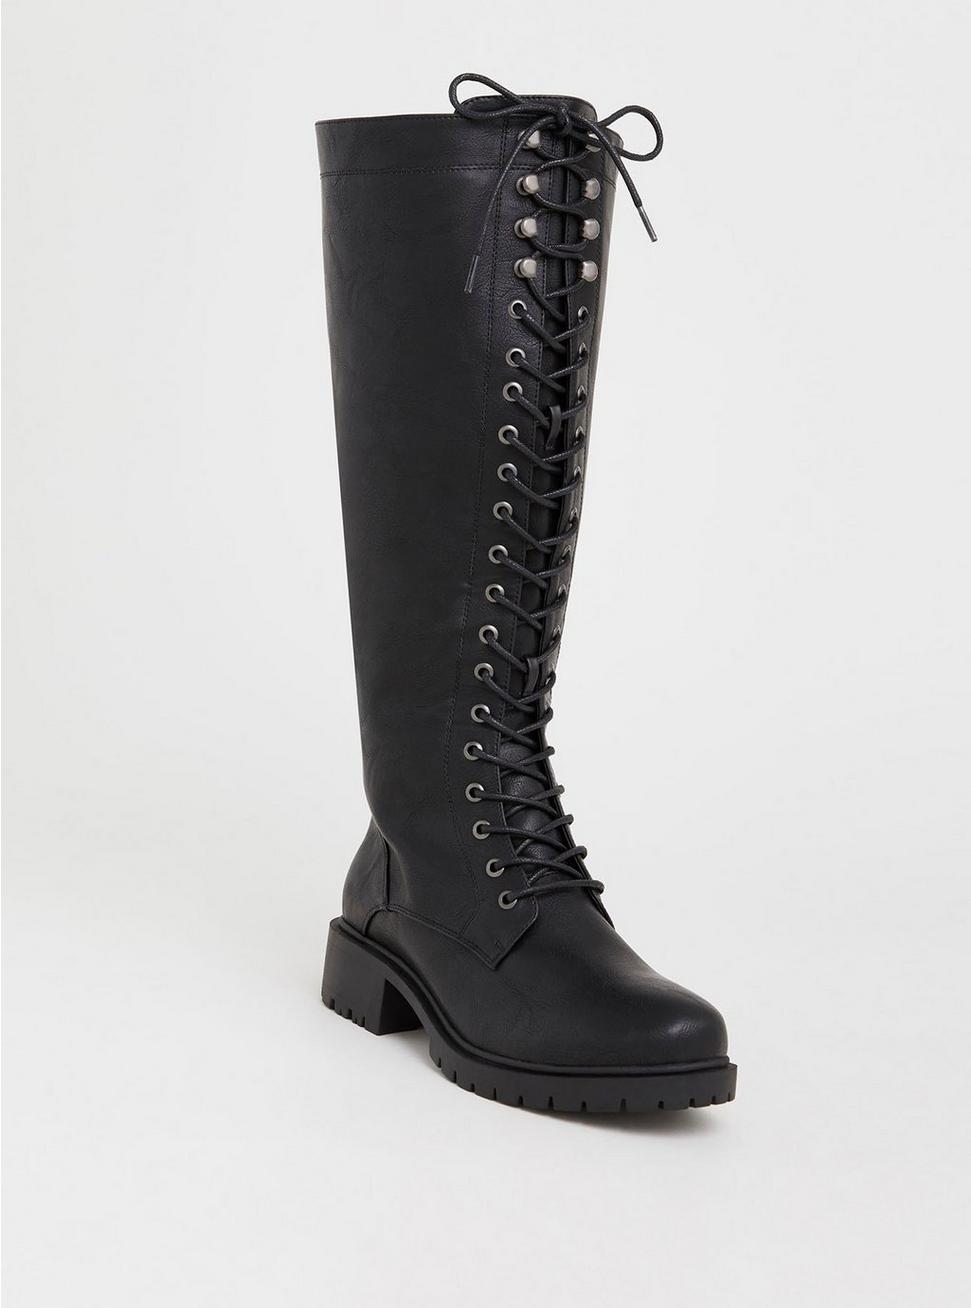 Adelaide Wreedheid stel voor Plus Size - Black Lace-Up Tall Combat Boot (WW & Wide To Extra Wide Calf) -  Torrid